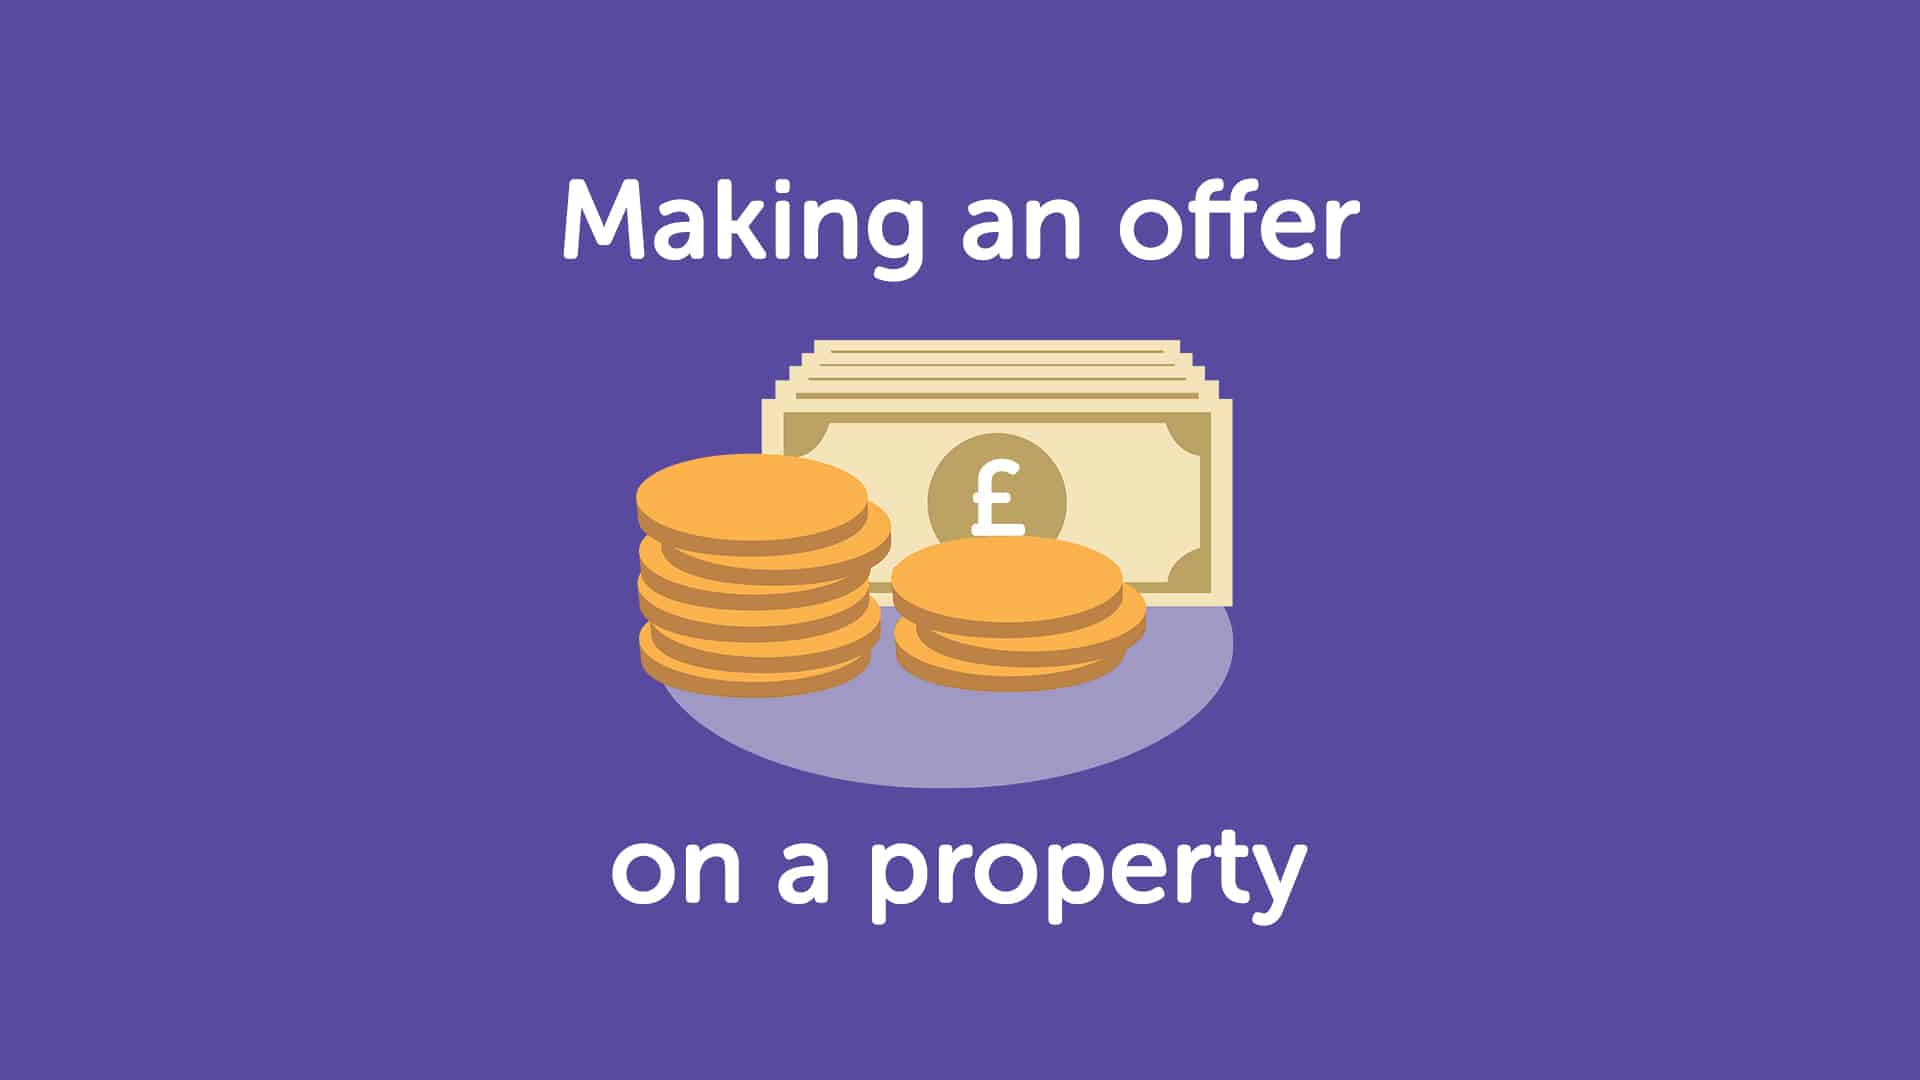 How to Make an Offer on a Property in Birmingham?